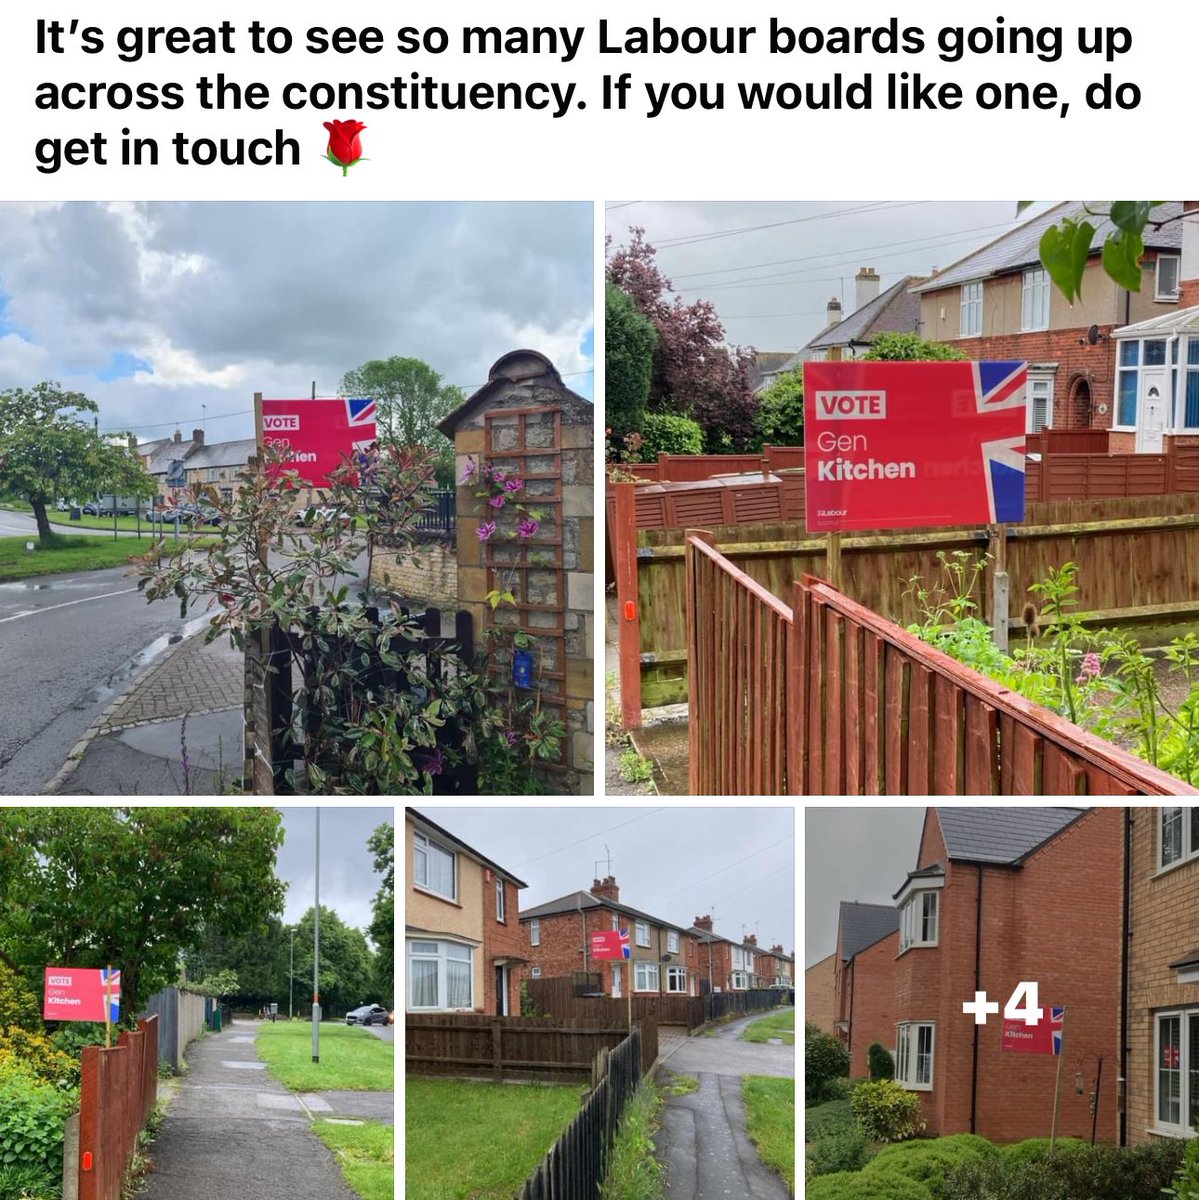 If you’d like a @UKLabour and @Gen_Kitchen_WR board or poster for your garden, fence, wall or window, please get in touch.

We’ve had a really strong response so far and we’d love to say we need to reorder!